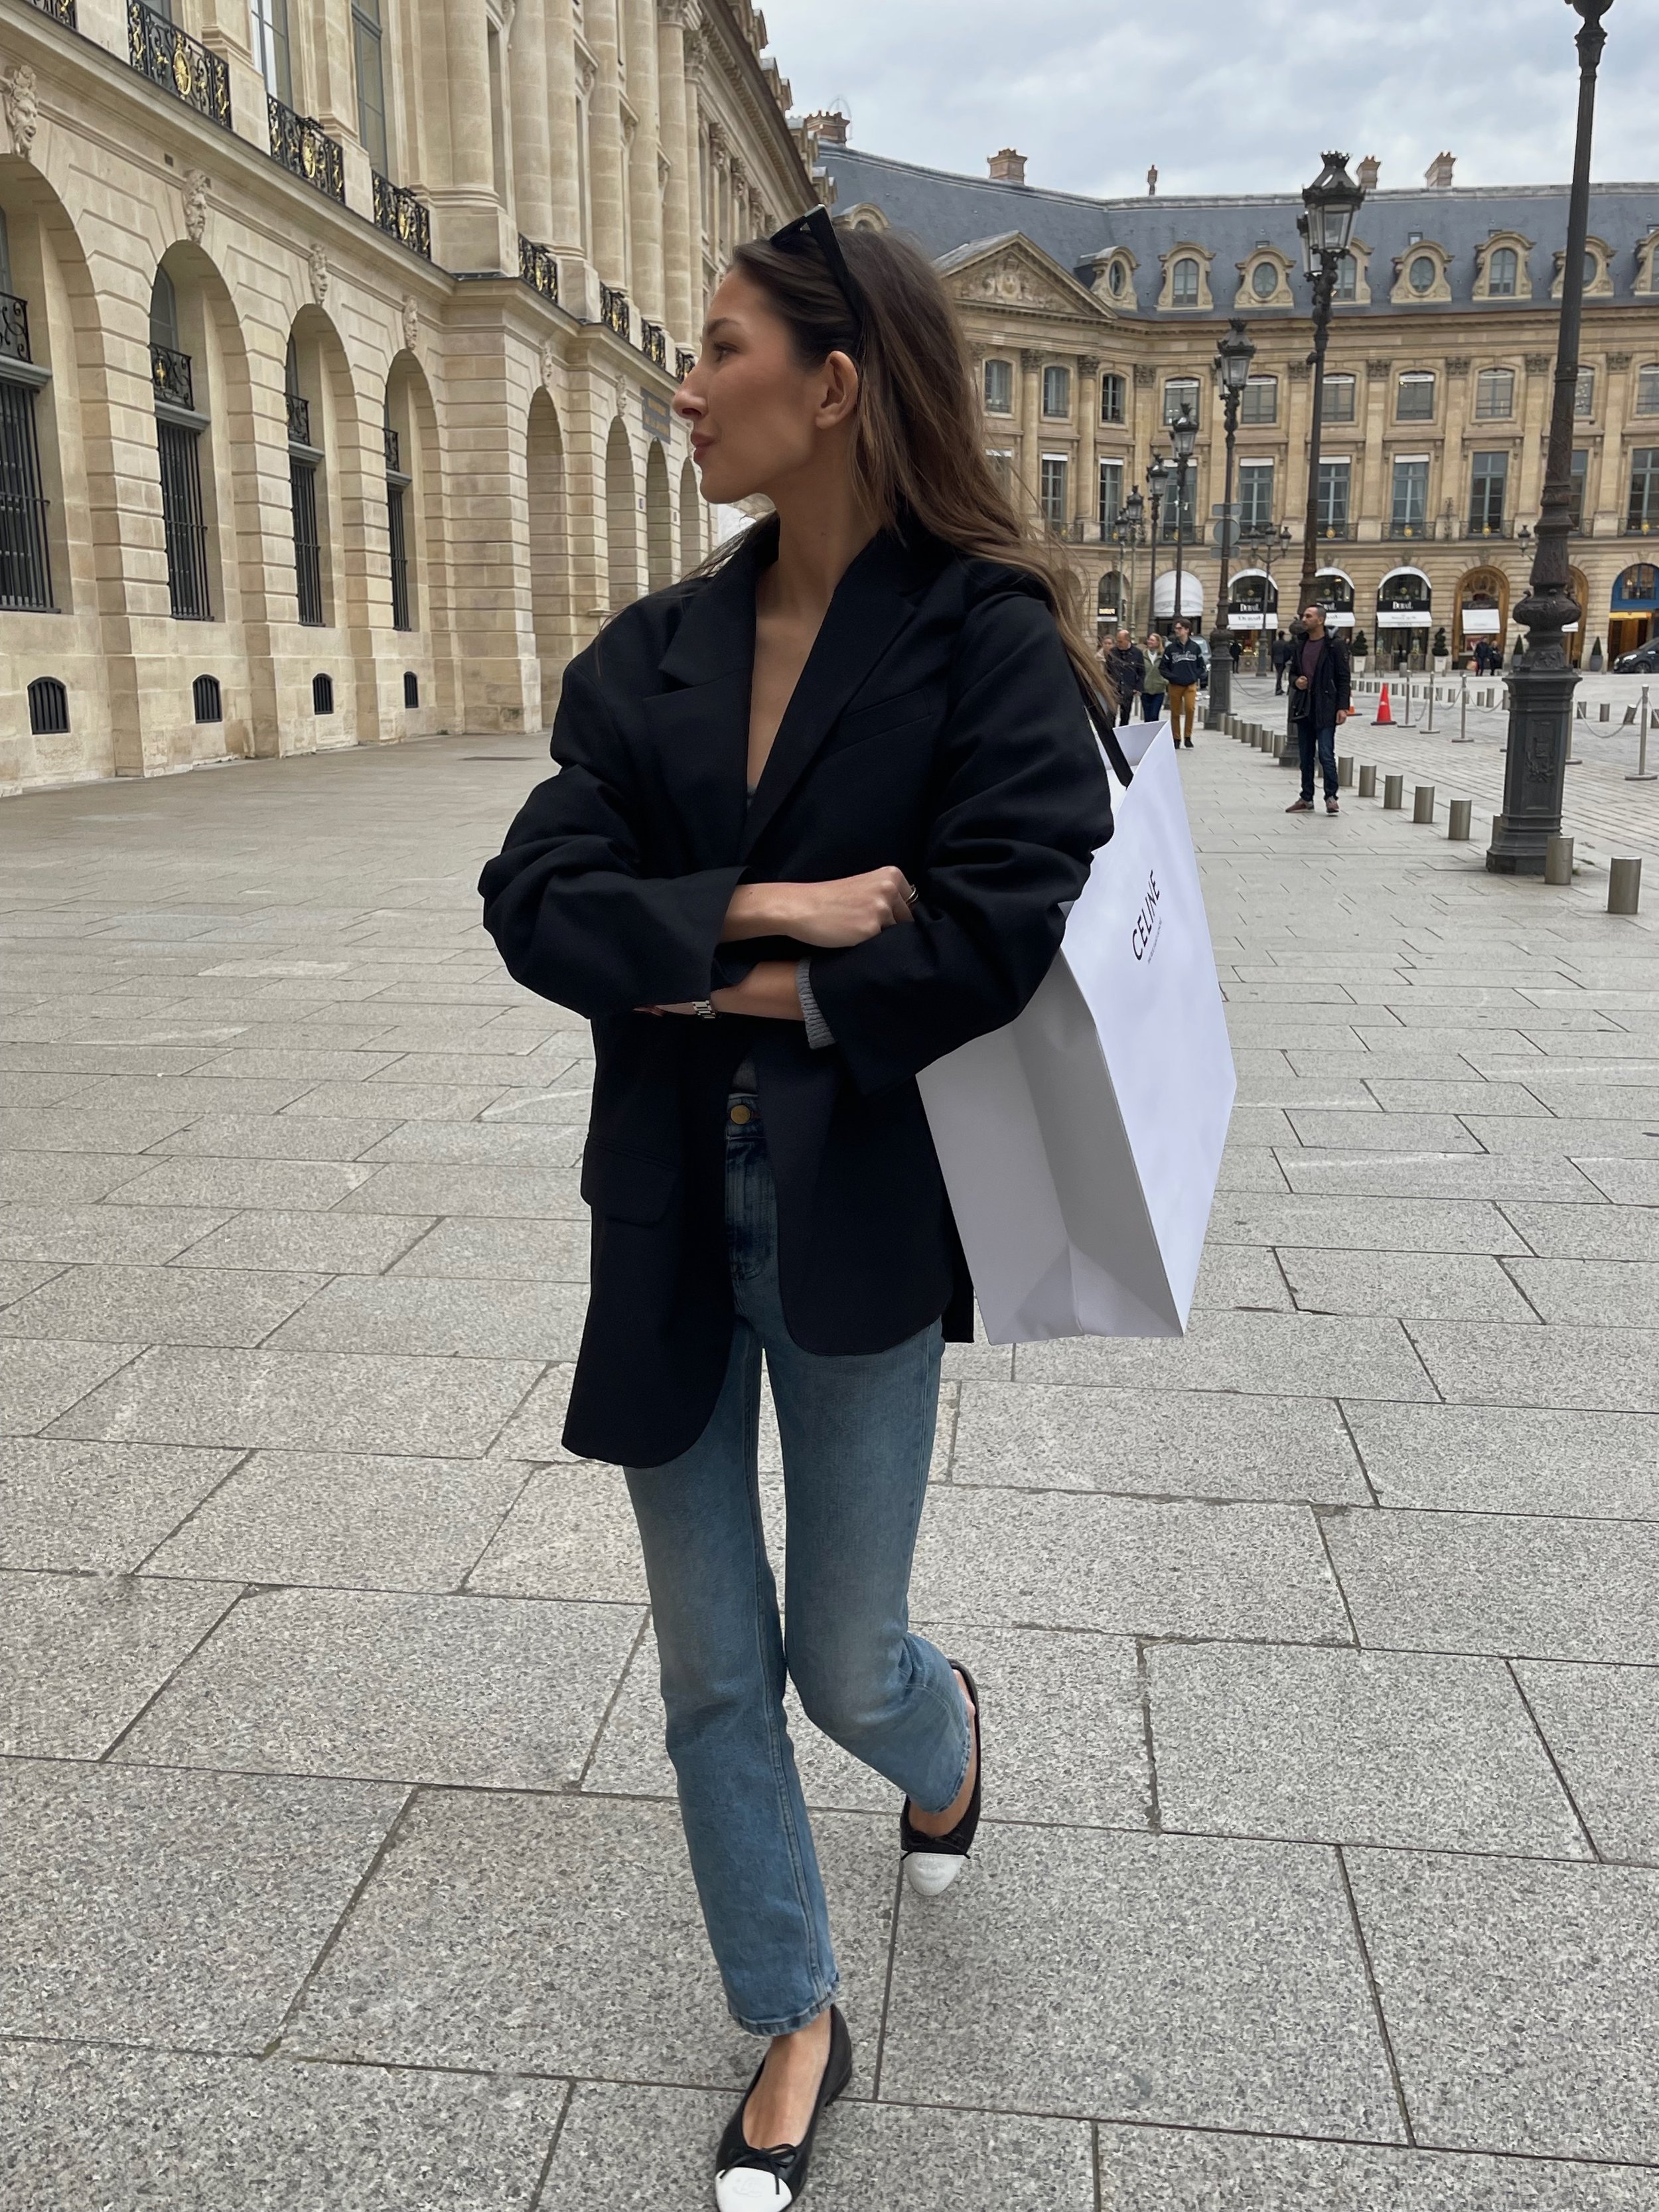 Bella Hadid Takes the Ballet Flat Out for a Twirl